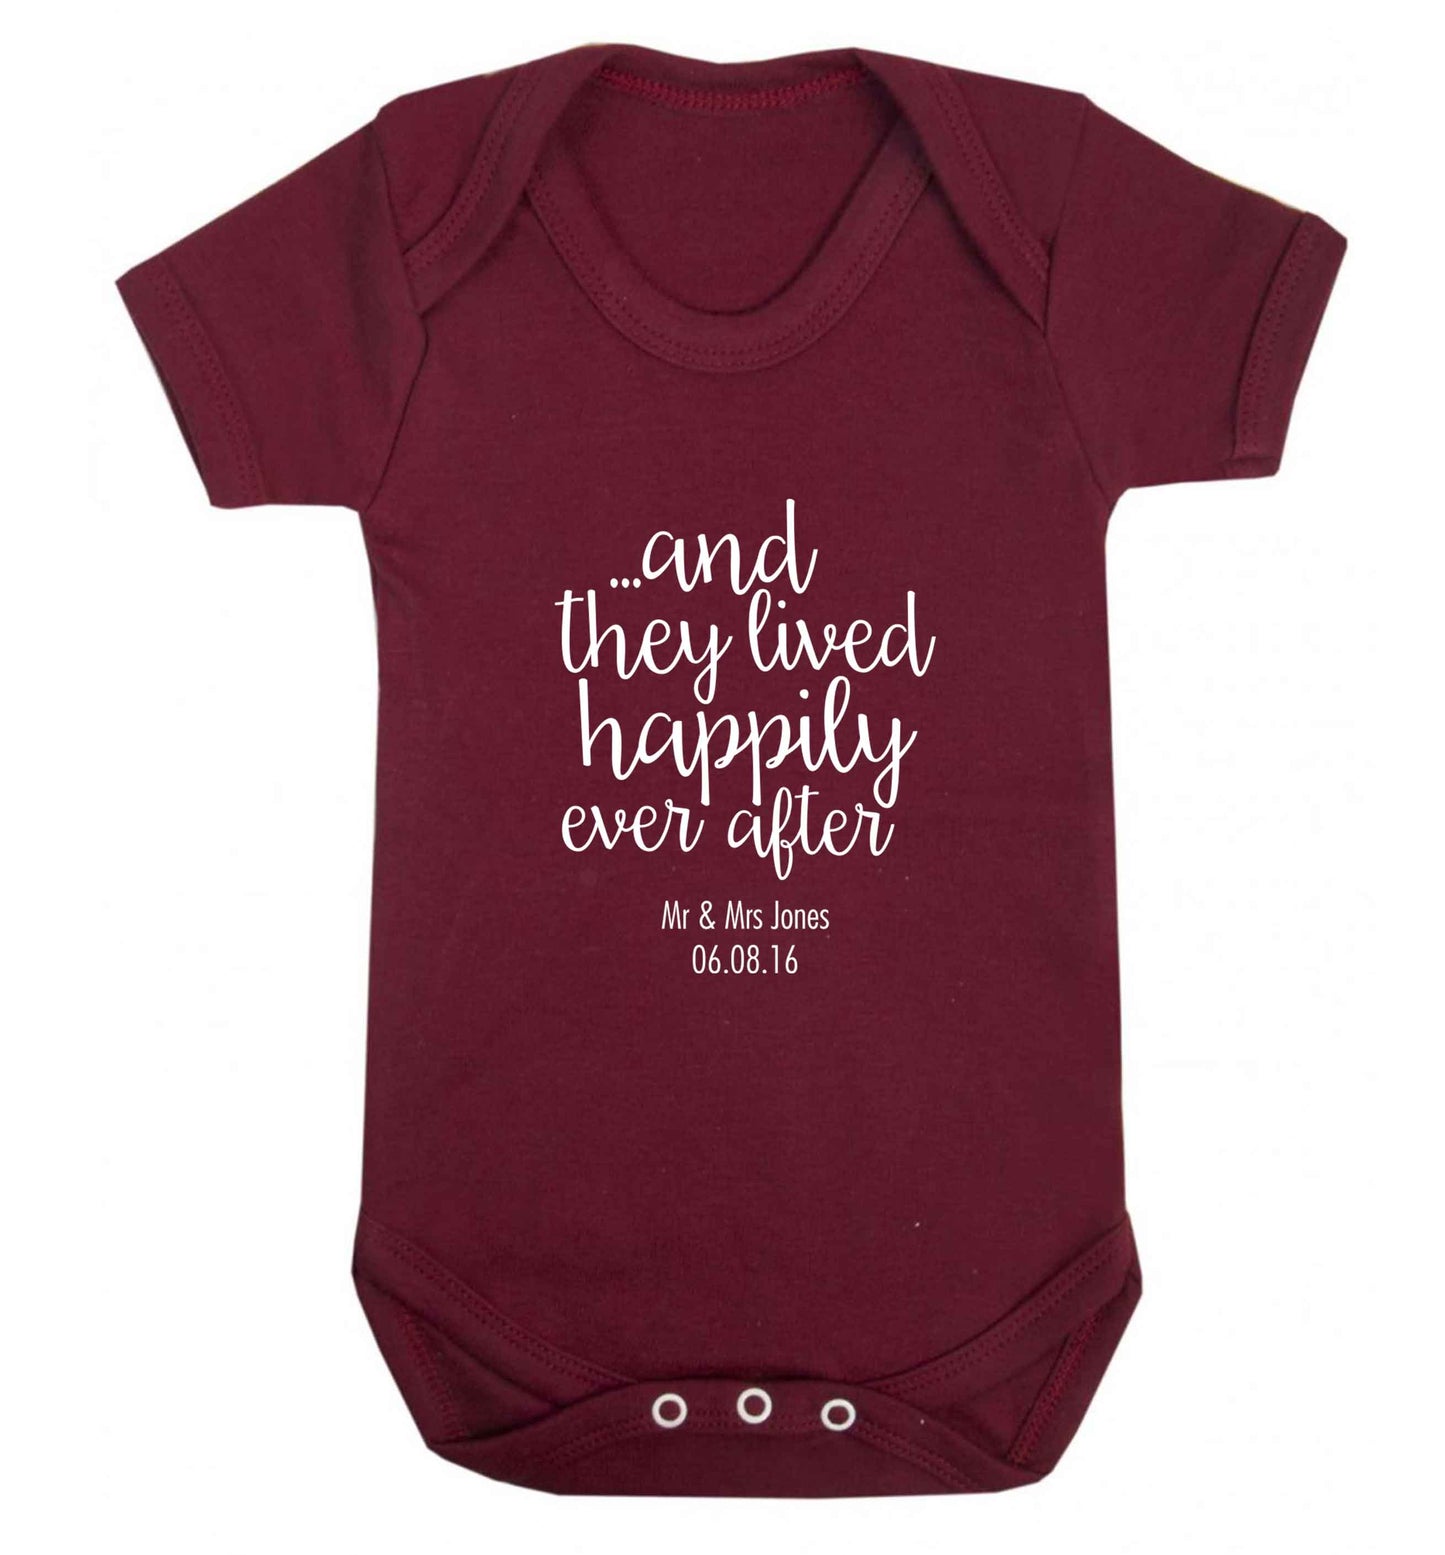 ...and they lived happily ever after - personalised date and names baby vest maroon 18-24 months